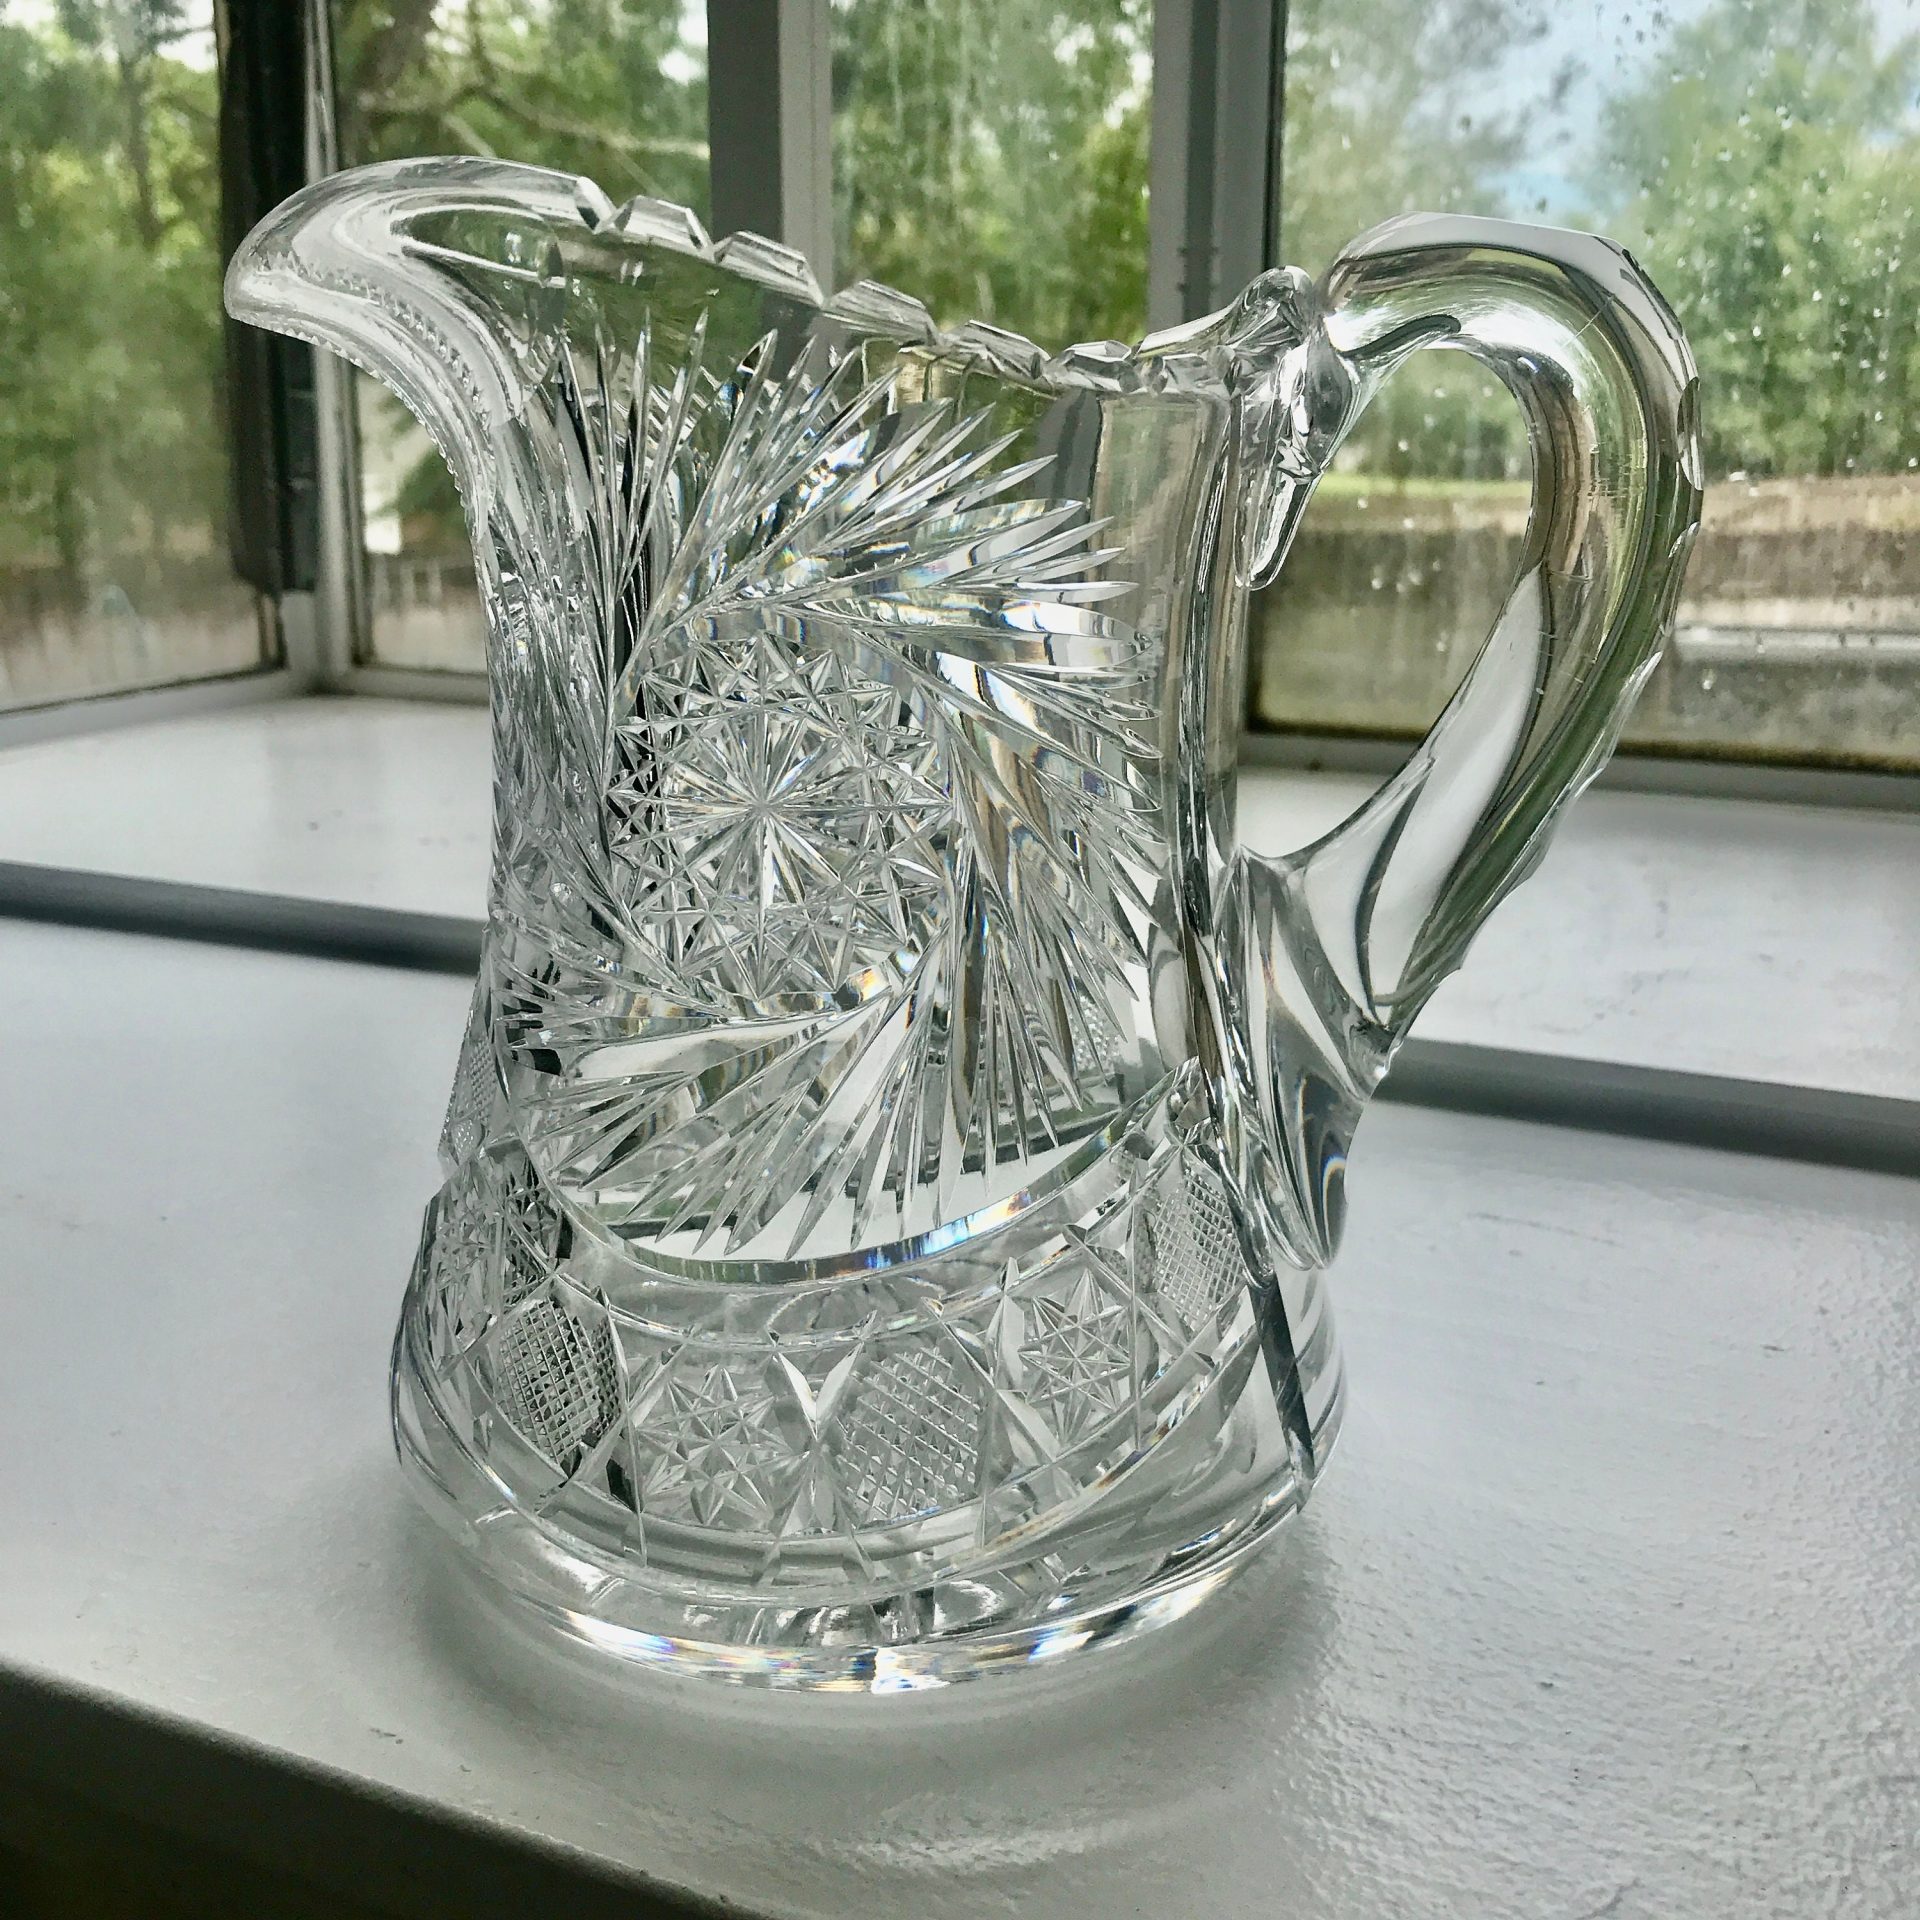 https://www.truevintageantiques.com/wp-content/uploads/2022/05/antique-american-brilliant-cut-crystal-pitcher-beautiful-large-cut-rim-and-handle-mint-condition-7-1-4-tall-collectible-display-elegant-629176aa10-scaled.jpg